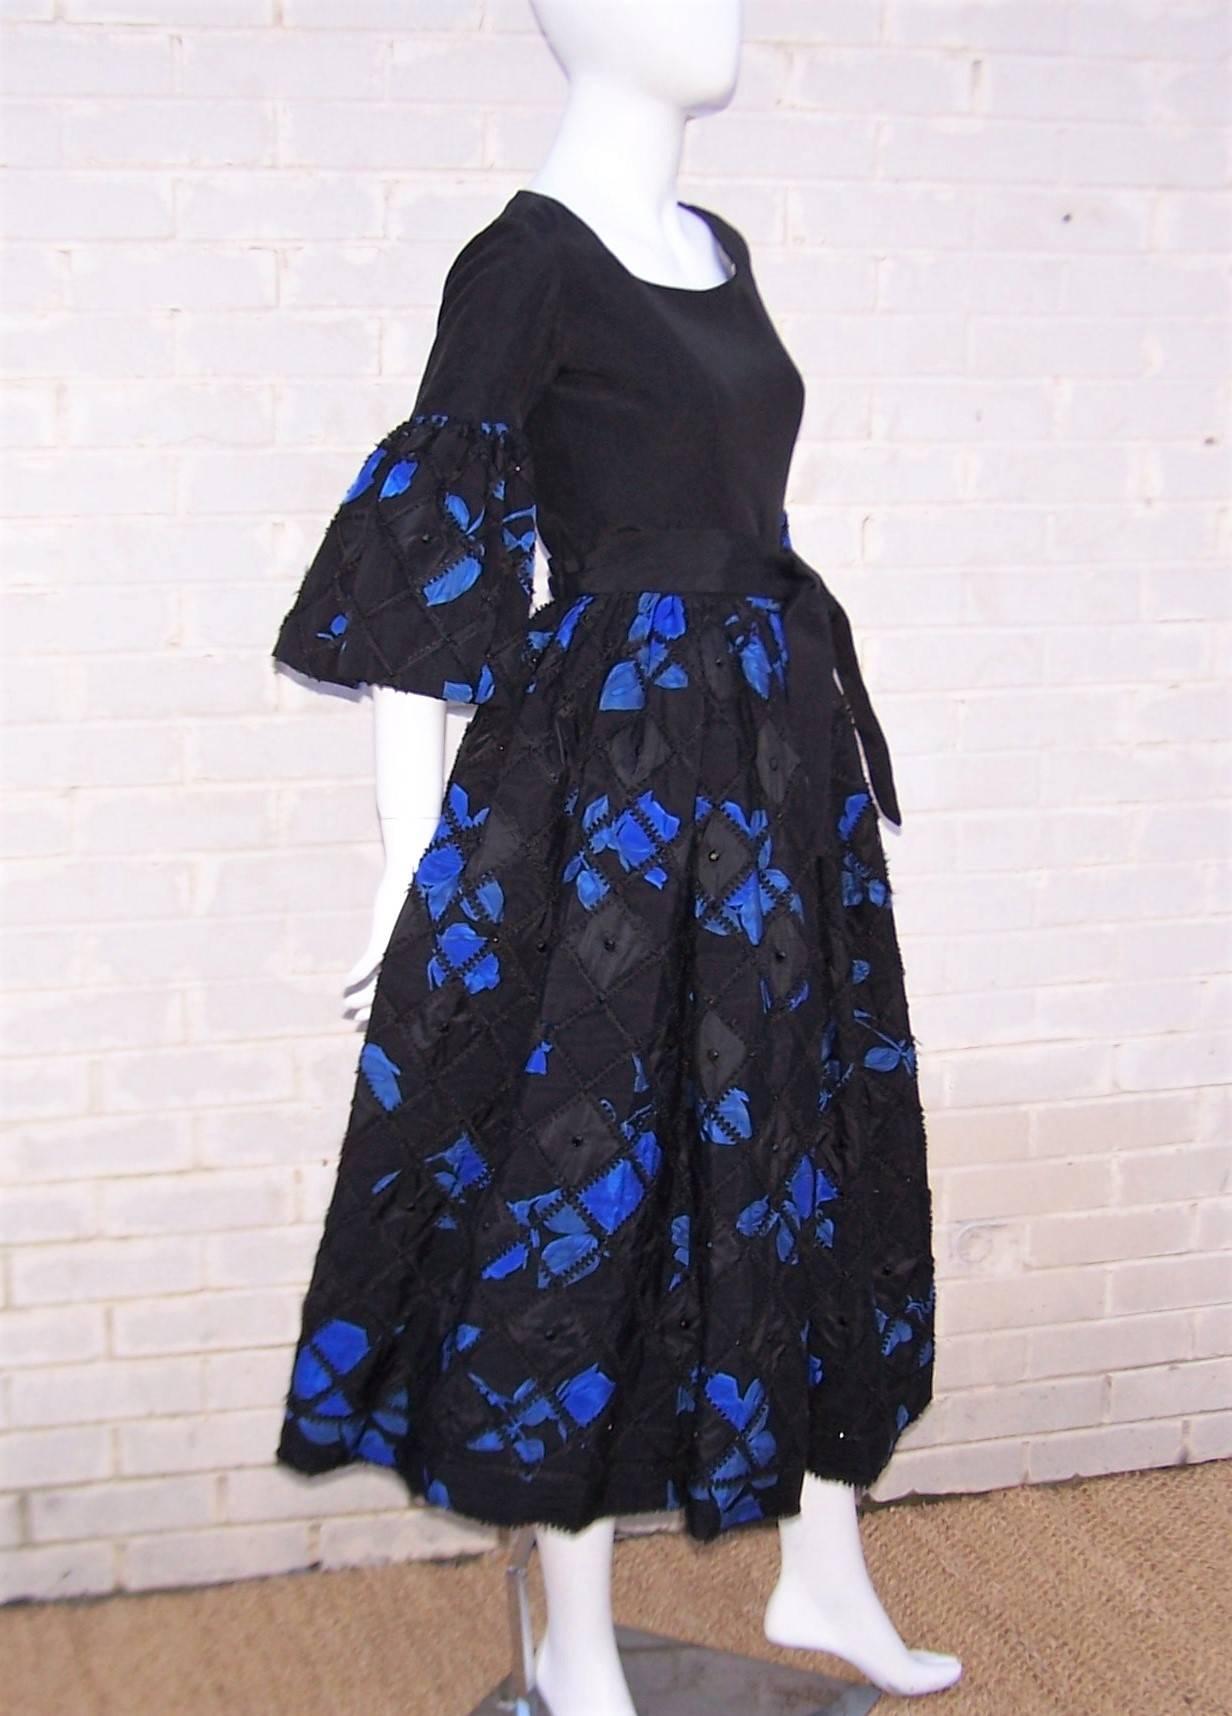 Fabulous!  Adolfo's designs from the 1970's are the epitome of ladylike charm and this two piece dress ensemble is here to prove it.  The pieces have a folkloric peasant dress style assembled from heavy black silk moire and coordinating electric